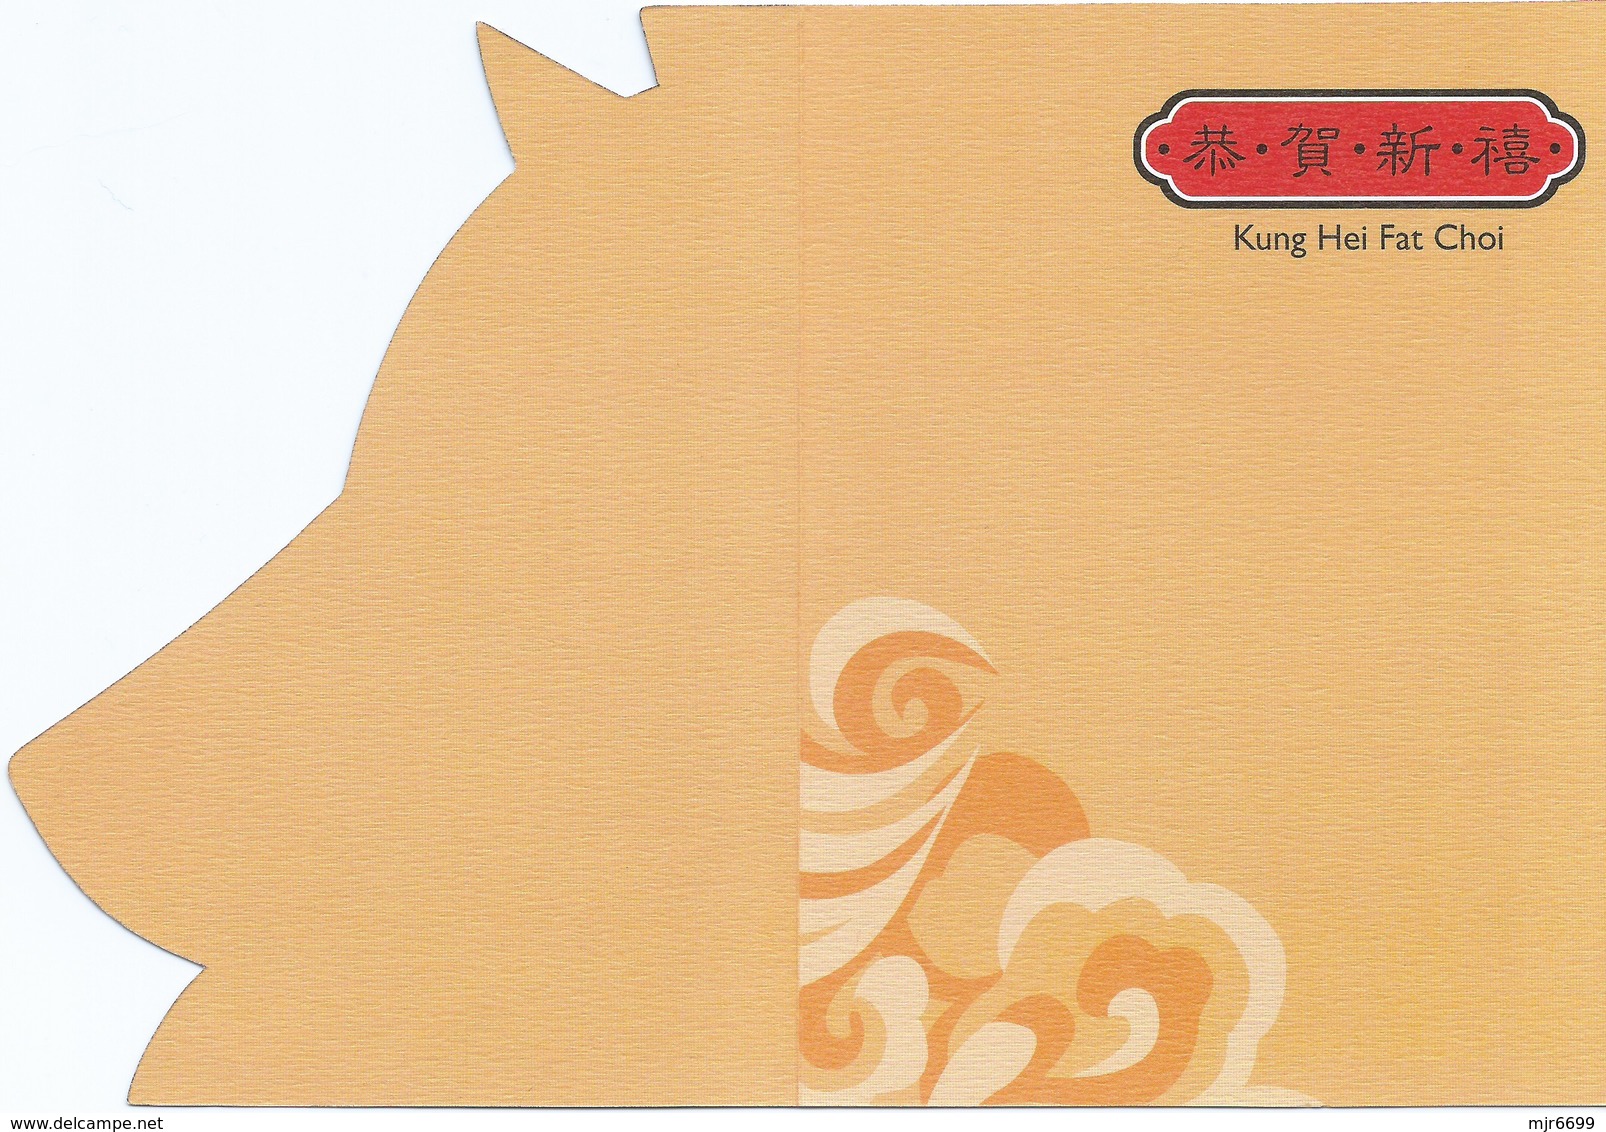 MACAU 2005 LUNAR YEAR OF THE DOG GREETING CARD & POSTAGE PAID COVER FIRST DAY USAGE WITH COLOANE POST CDS - Postal Stationery